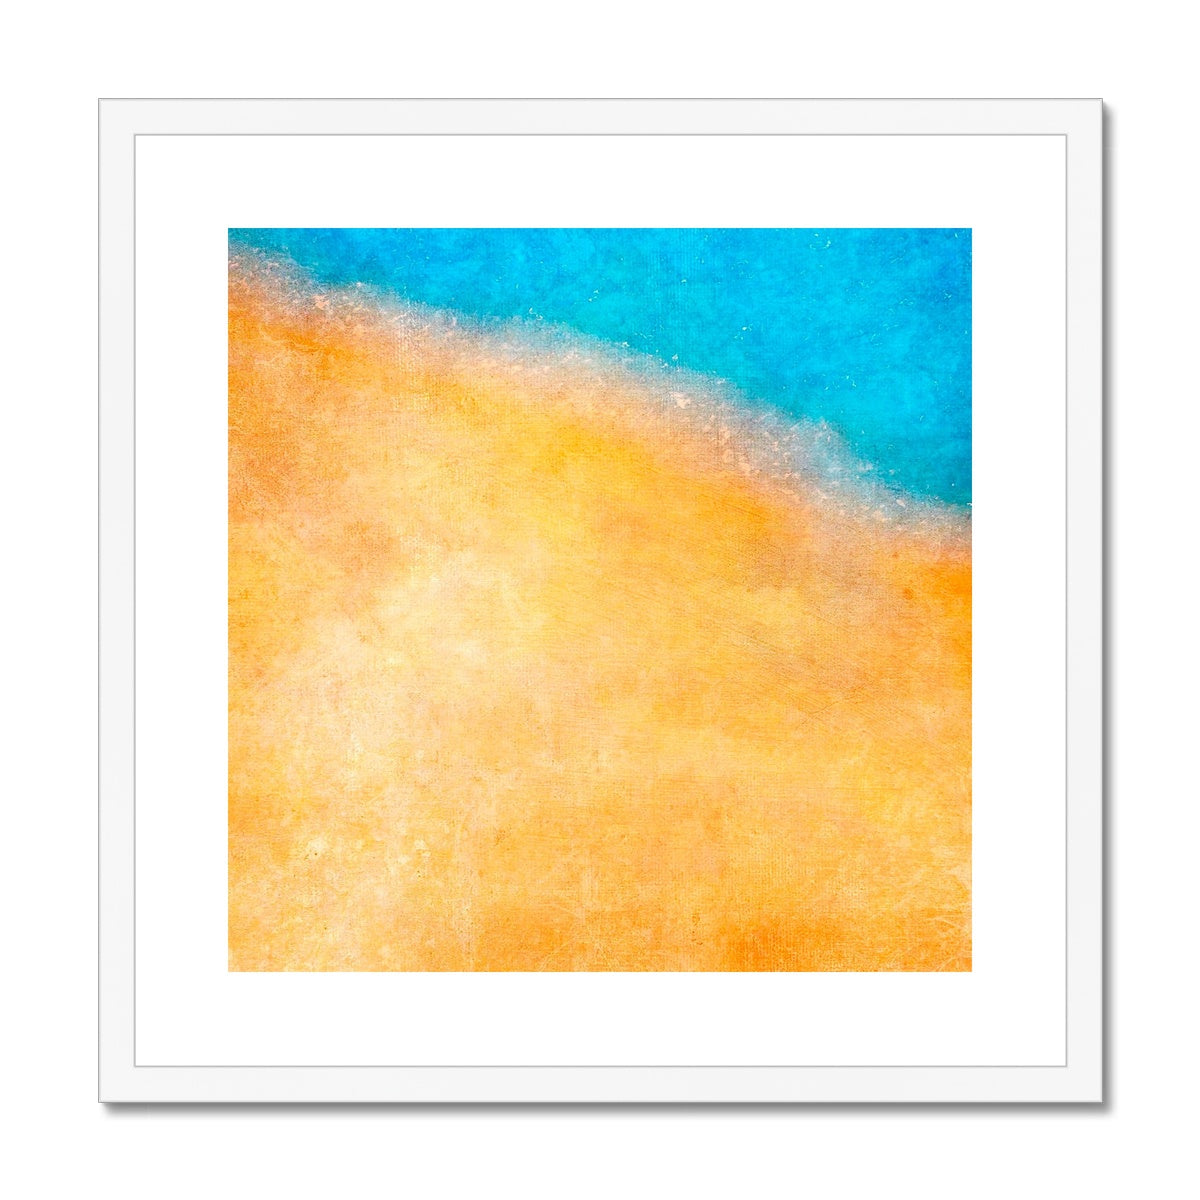 The Shoreline Abstract Painting | Framed & Mounted Prints From Scotland-Framed & Mounted Prints-Abstract & Impressionistic Art Gallery-20"x20"-White Frame-Paintings, Prints, Homeware, Art Gifts From Scotland By Scottish Artist Kevin Hunter